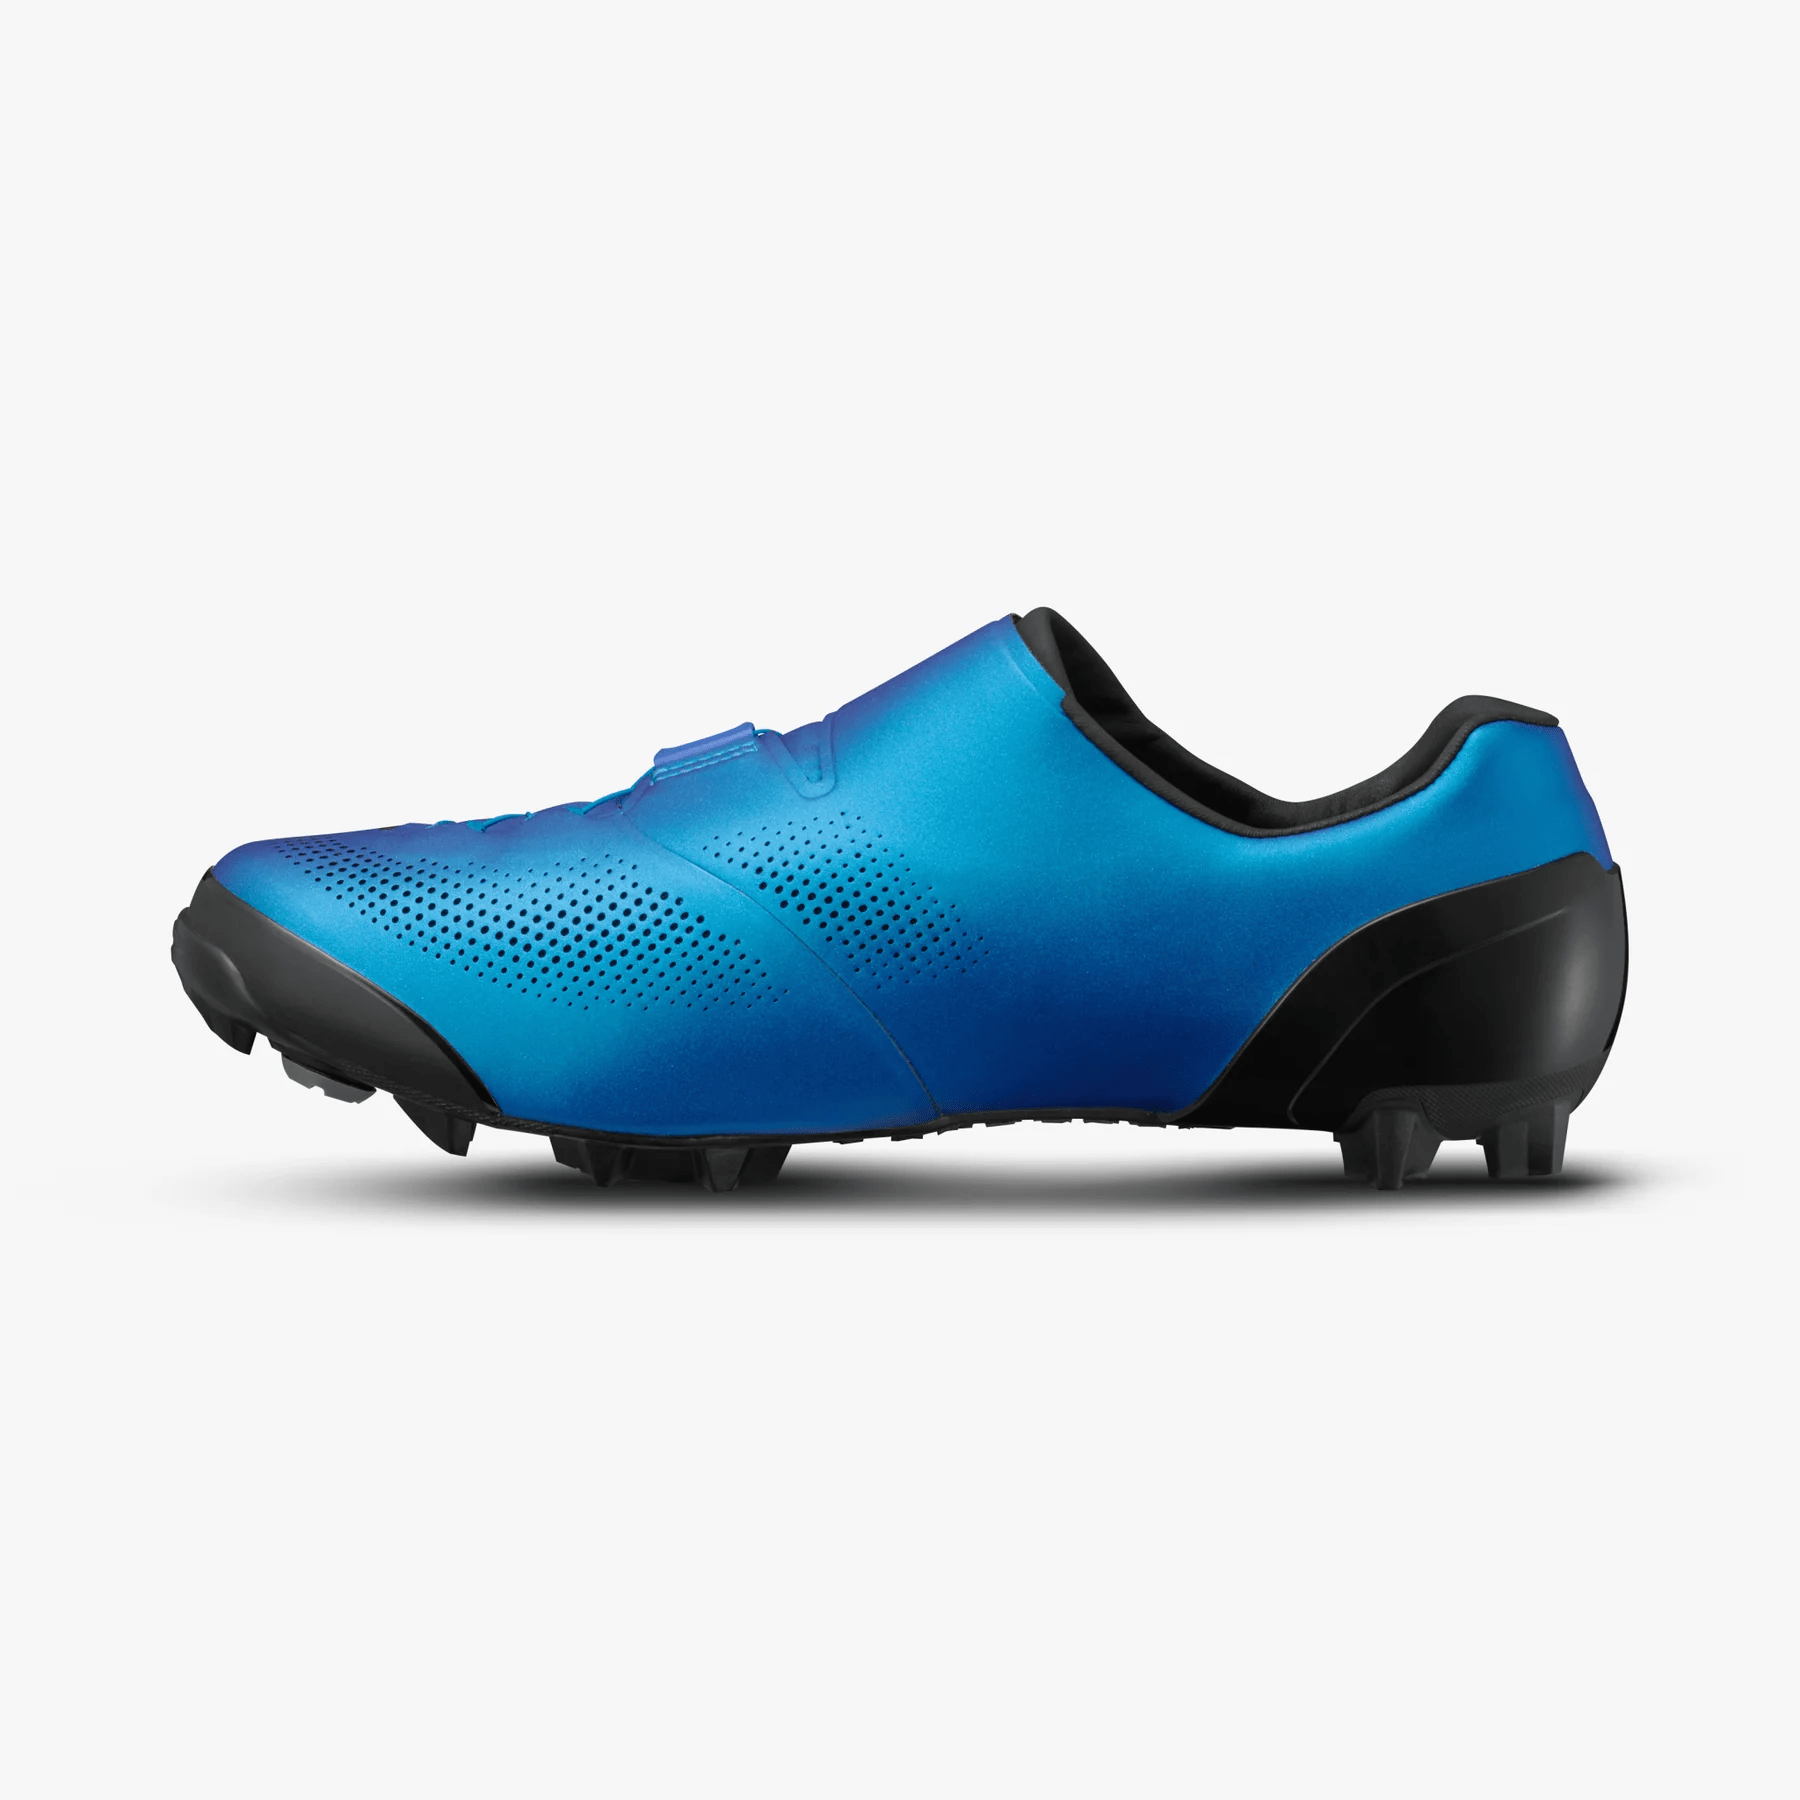 Shimano S-PHYRE SH-XC903 Shoe Apparel - Apparel Accessories - Shoes - Mountain - Clip-in